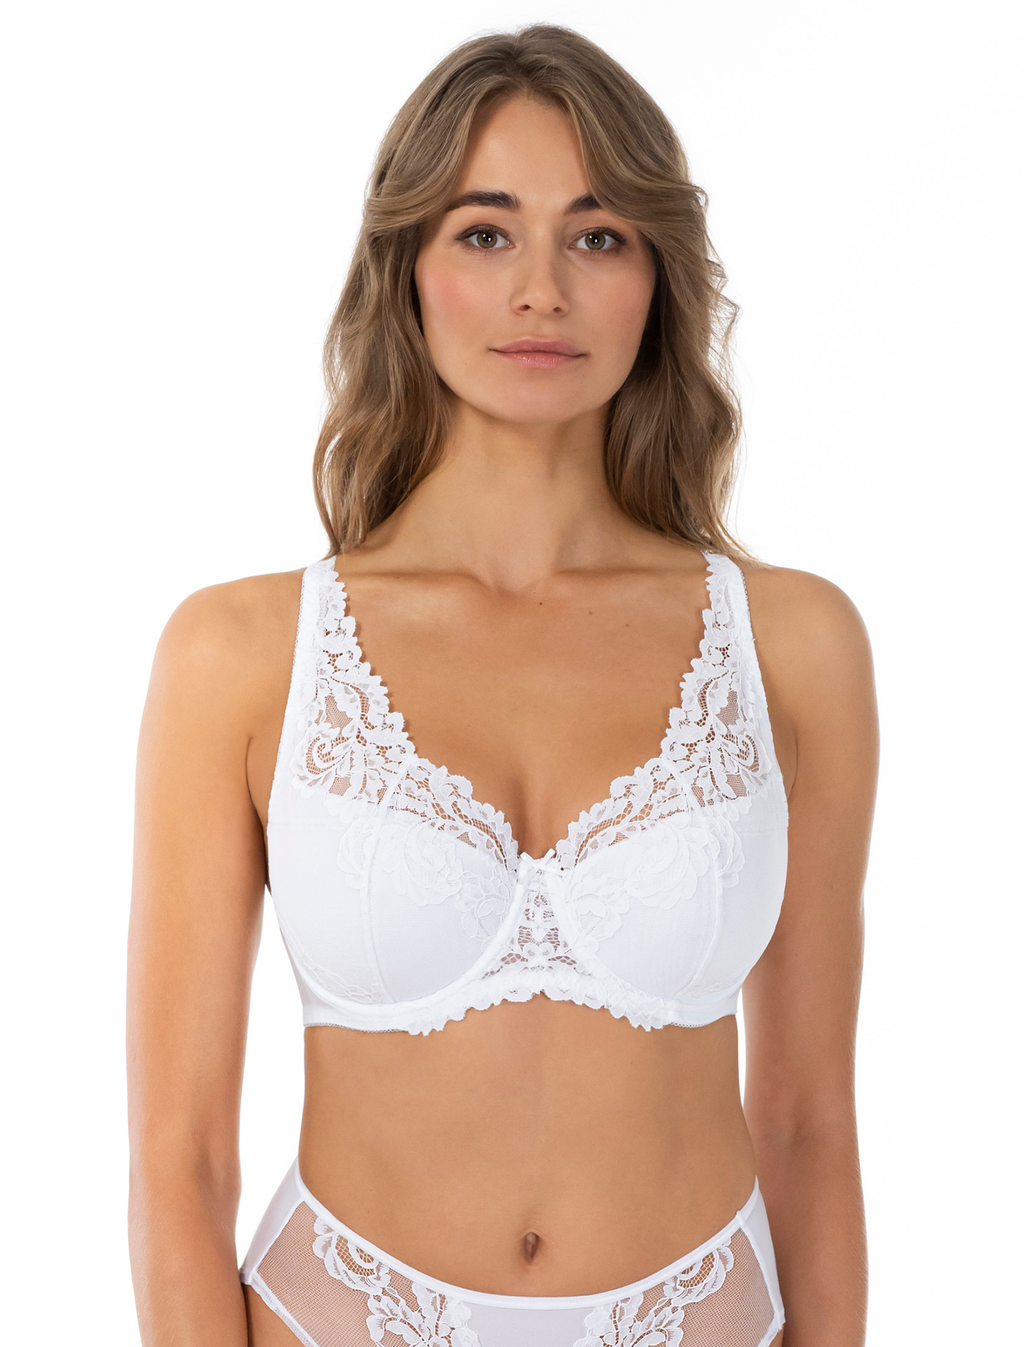 Lauma Lingerie Uganda - From our collection of classic bras, we give you;  💖A practical everyday soft cup bra. 💖 Quality and durable fabric. 💖Big  bra straps and 3 hooks. 💖 Beautiful